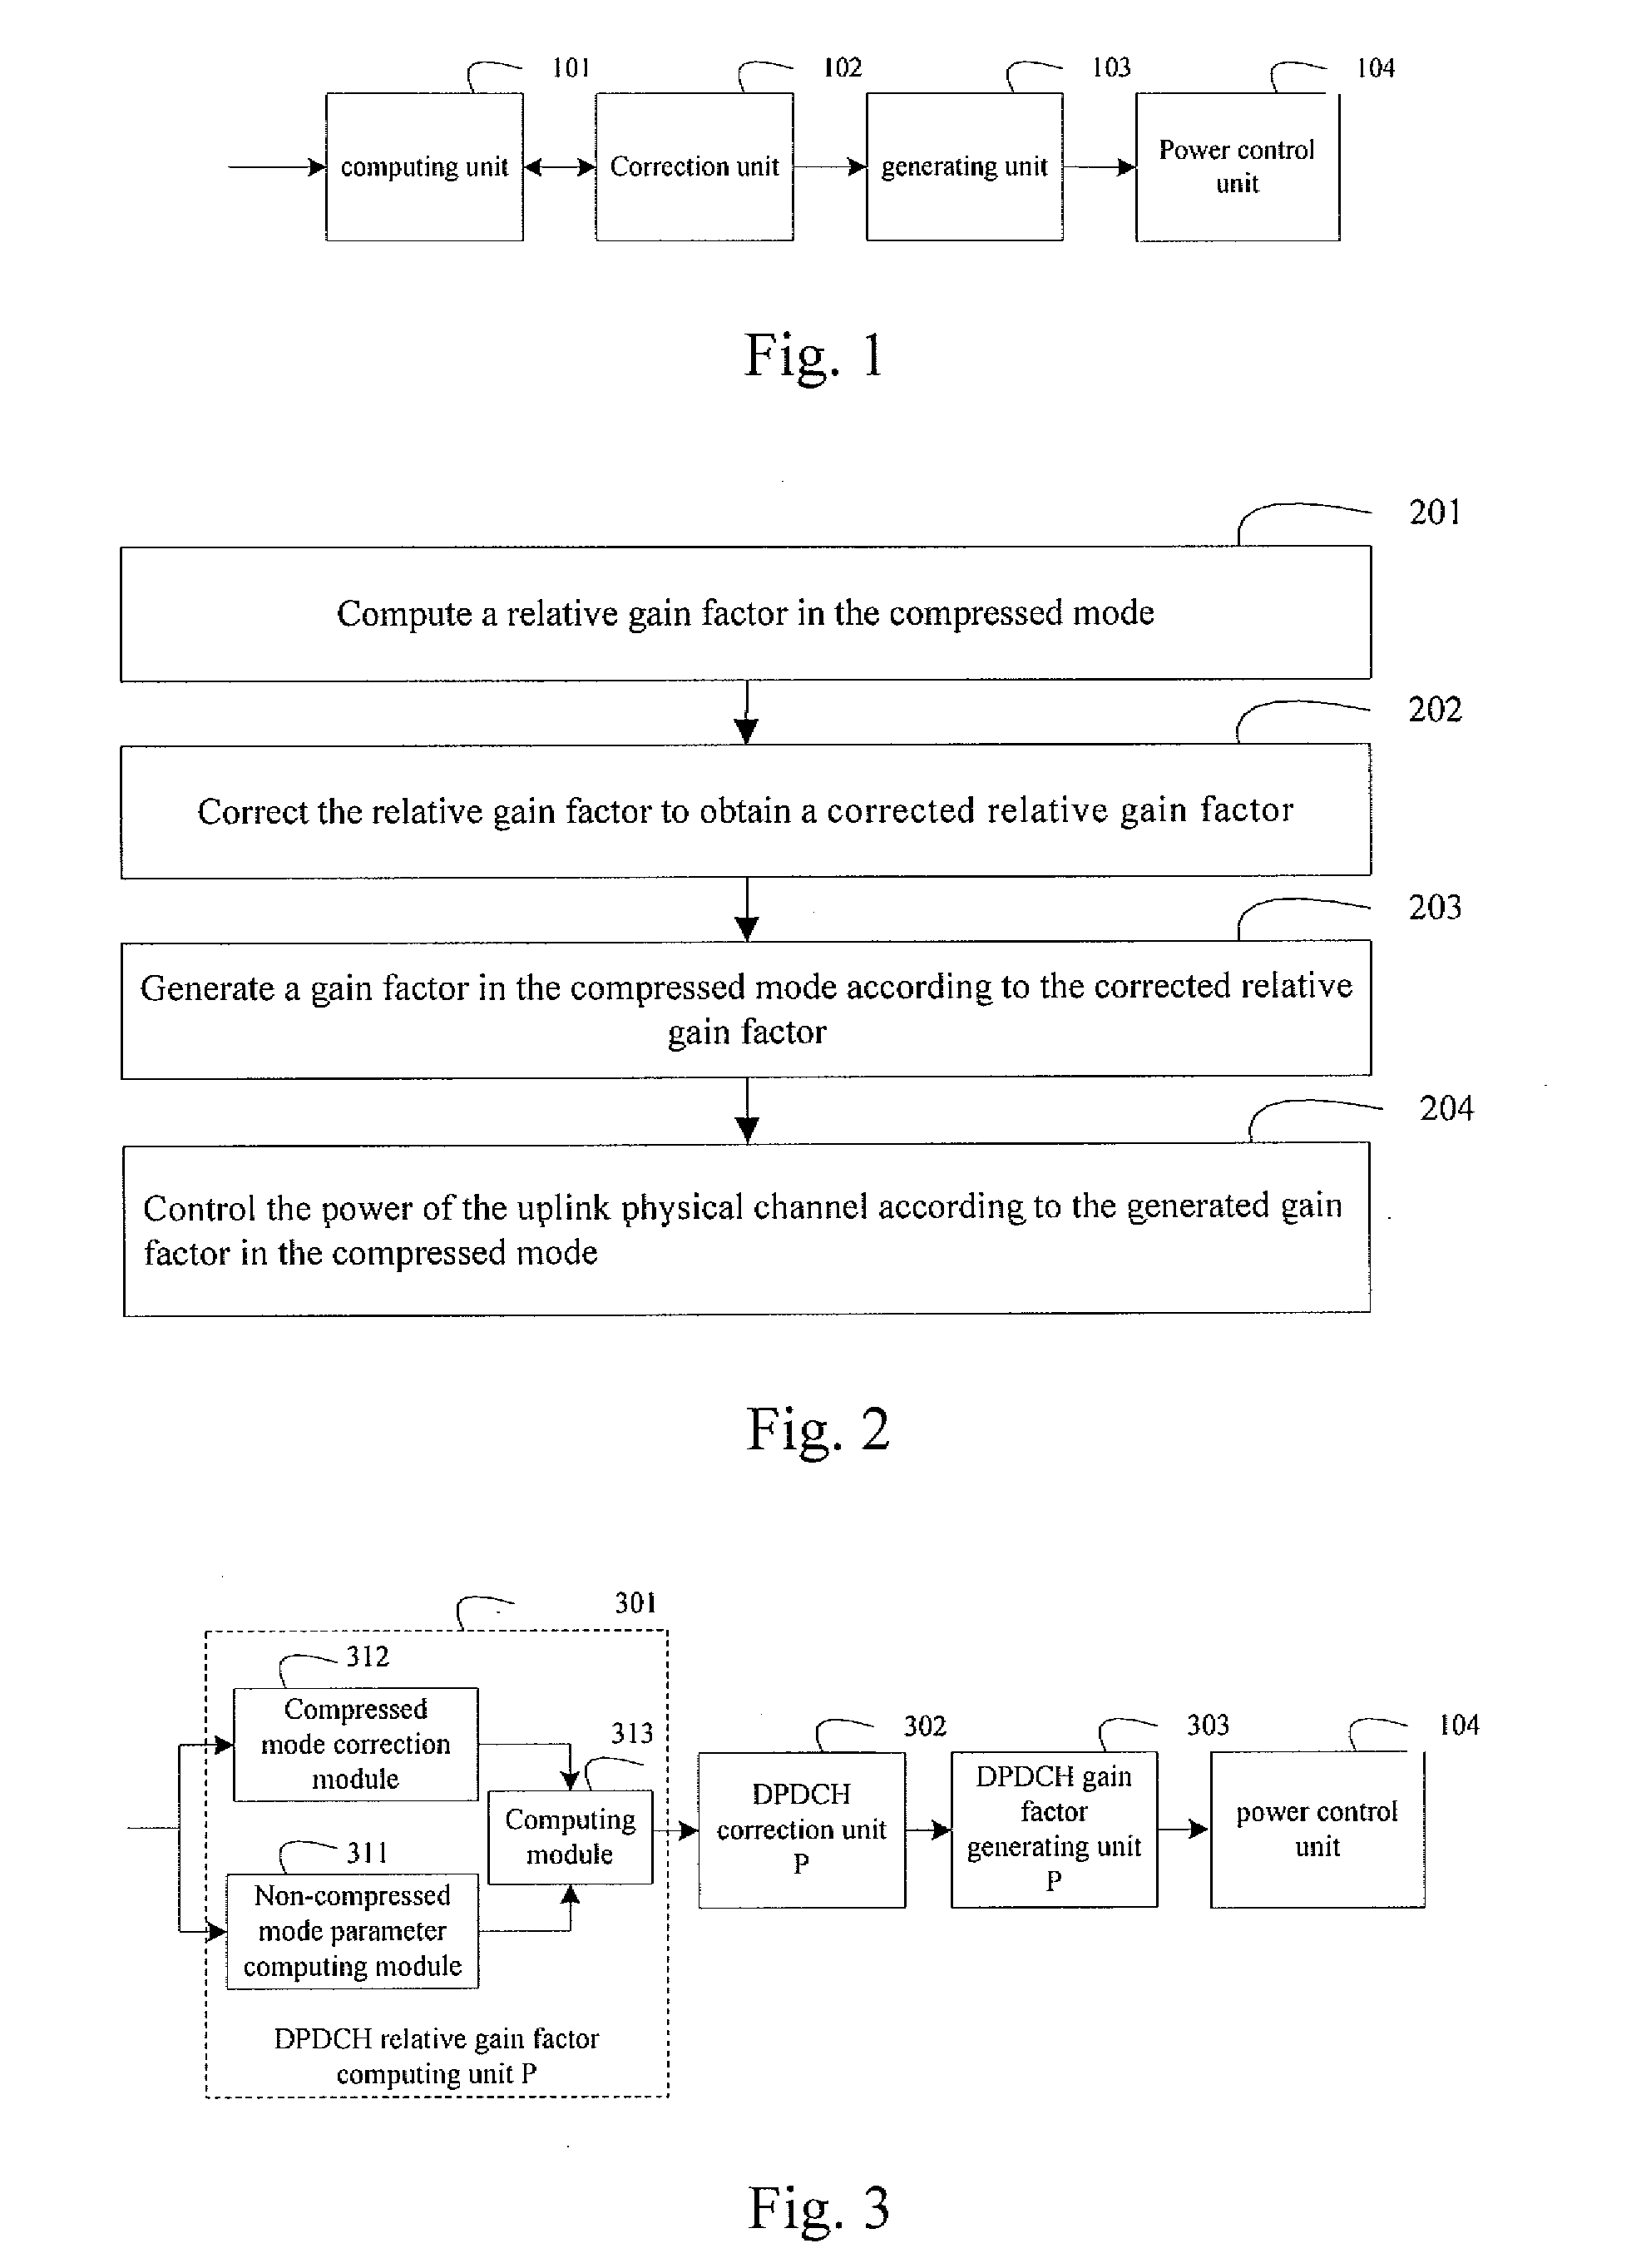 Method and apparatus for controlling power of uplink physical channel